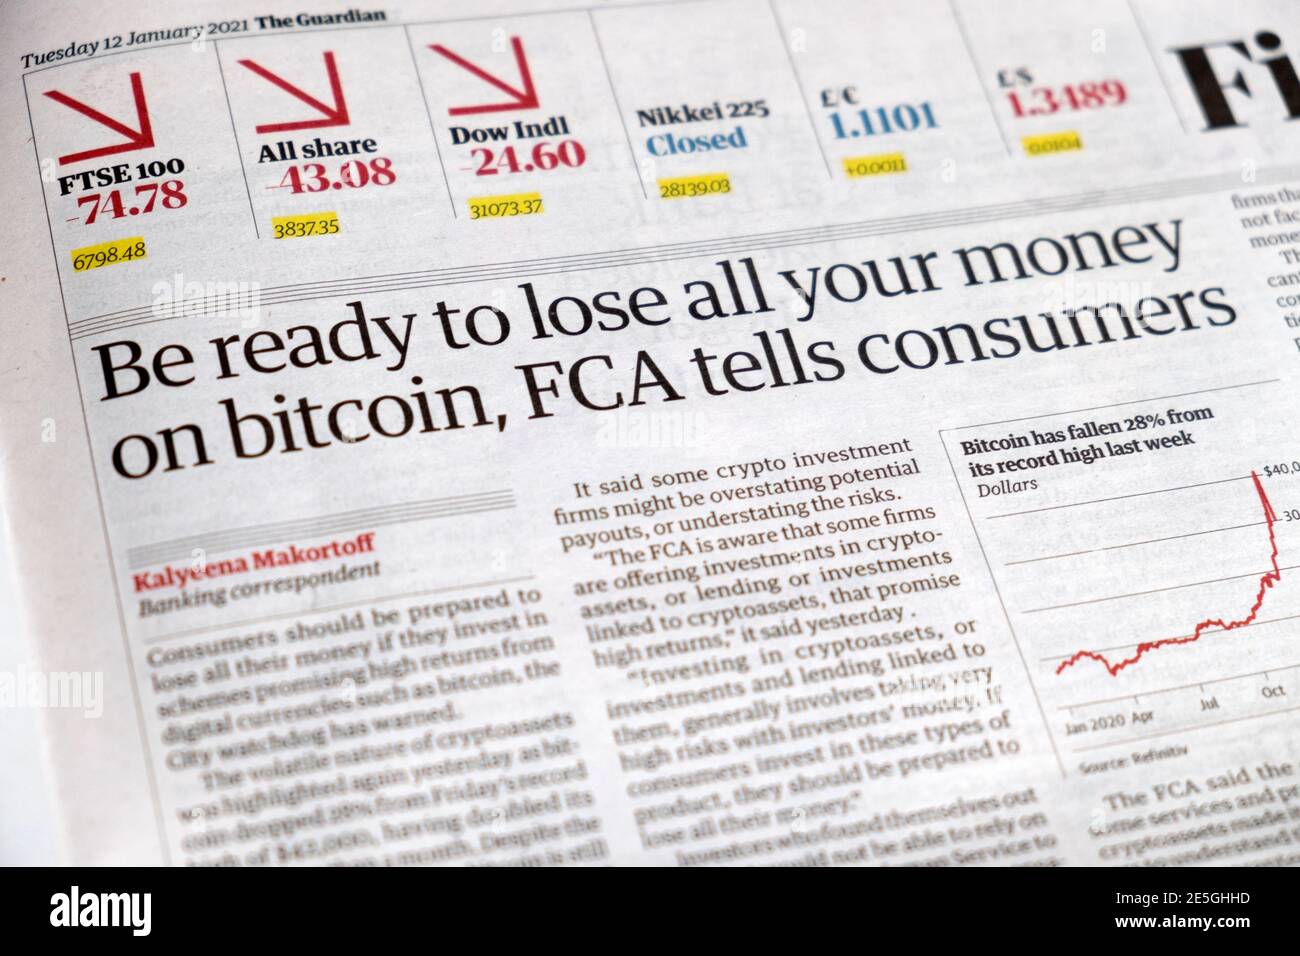 'Be ready to lose all your money on bitcoin, FCA tells consumers' Financial newspaper headline in Guardian 12 January 2021 Great Britain UK Europe Stock Photo